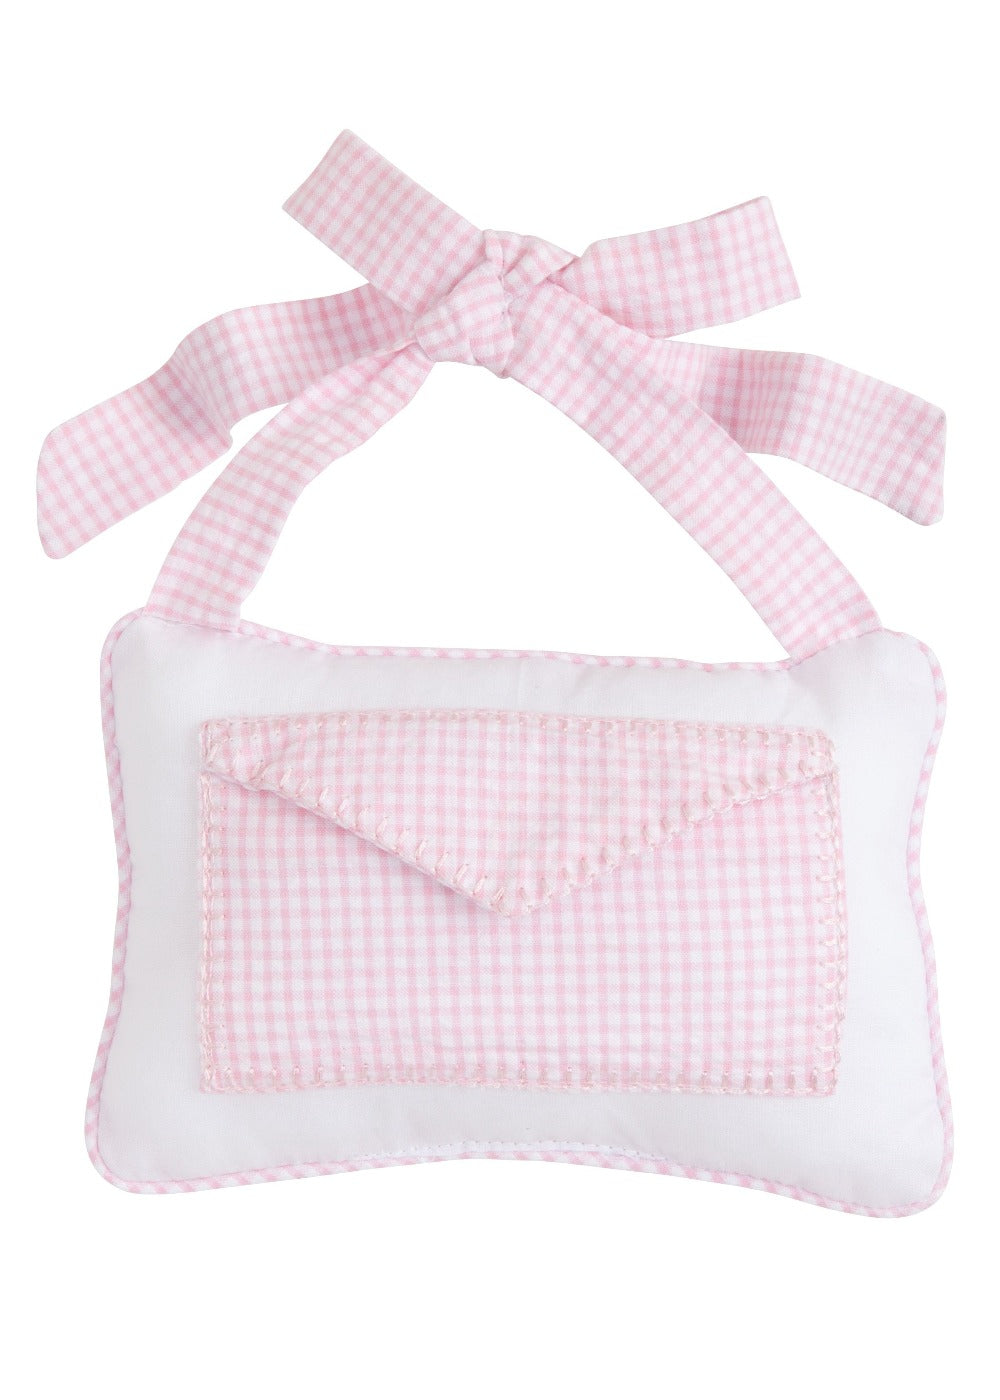 seguridadindustrialcr gift card holder, classic door pillow with pocket in pink, baby girl gift